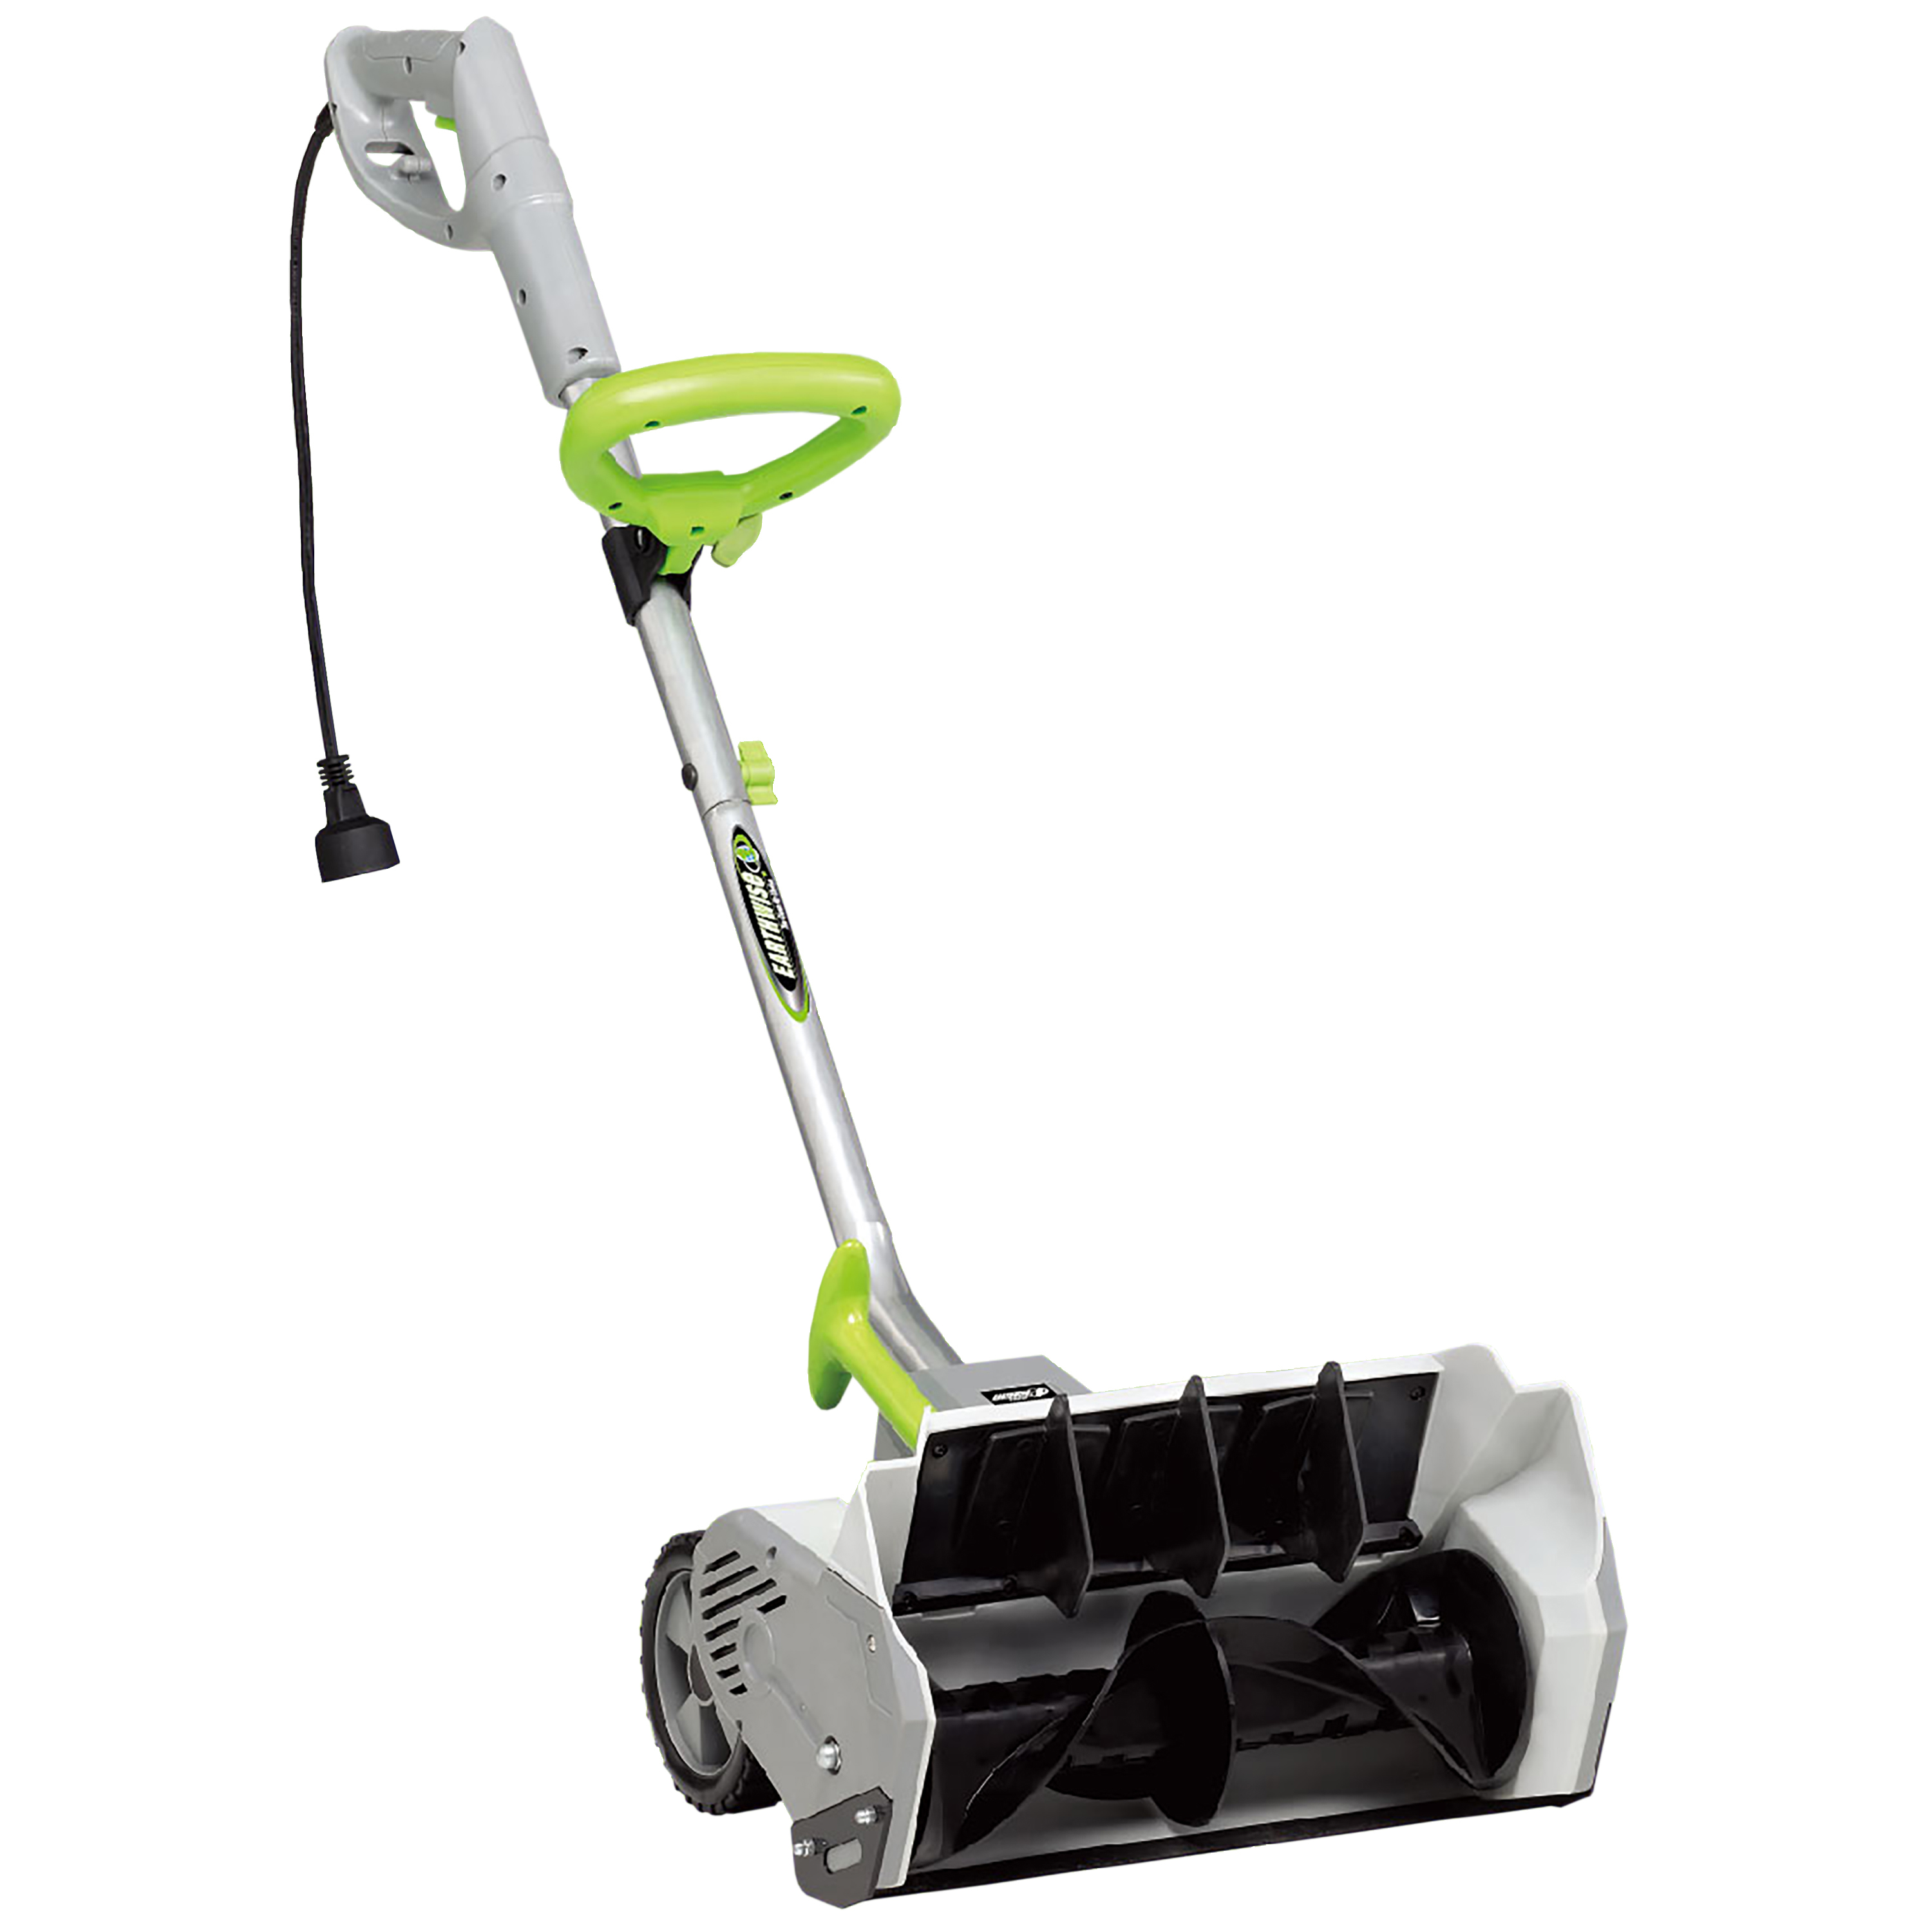 Earthwise 16" Wide Snow Shovel, Corded Electric Snow Thrower Shovel - 430 LBS/Minute, SN70016 - image 1 of 5